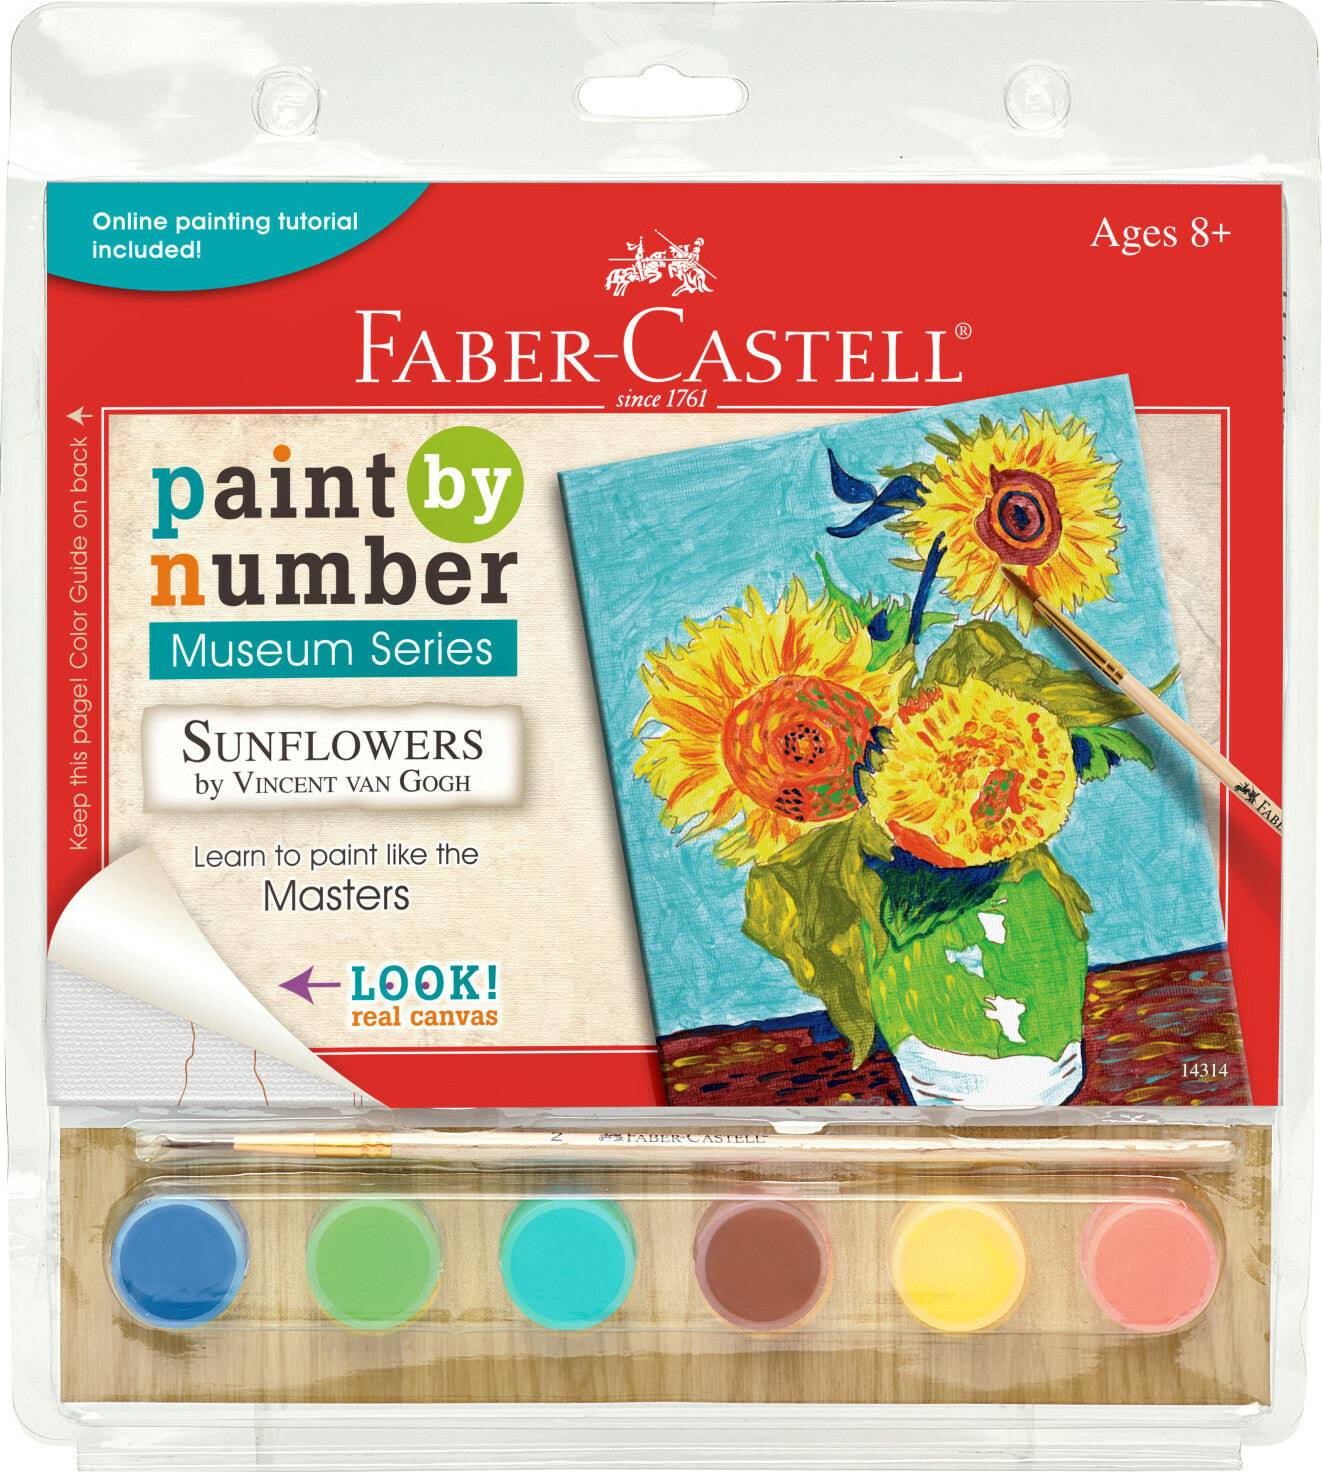 Paint By Number Sunflowers - A Child's Delight